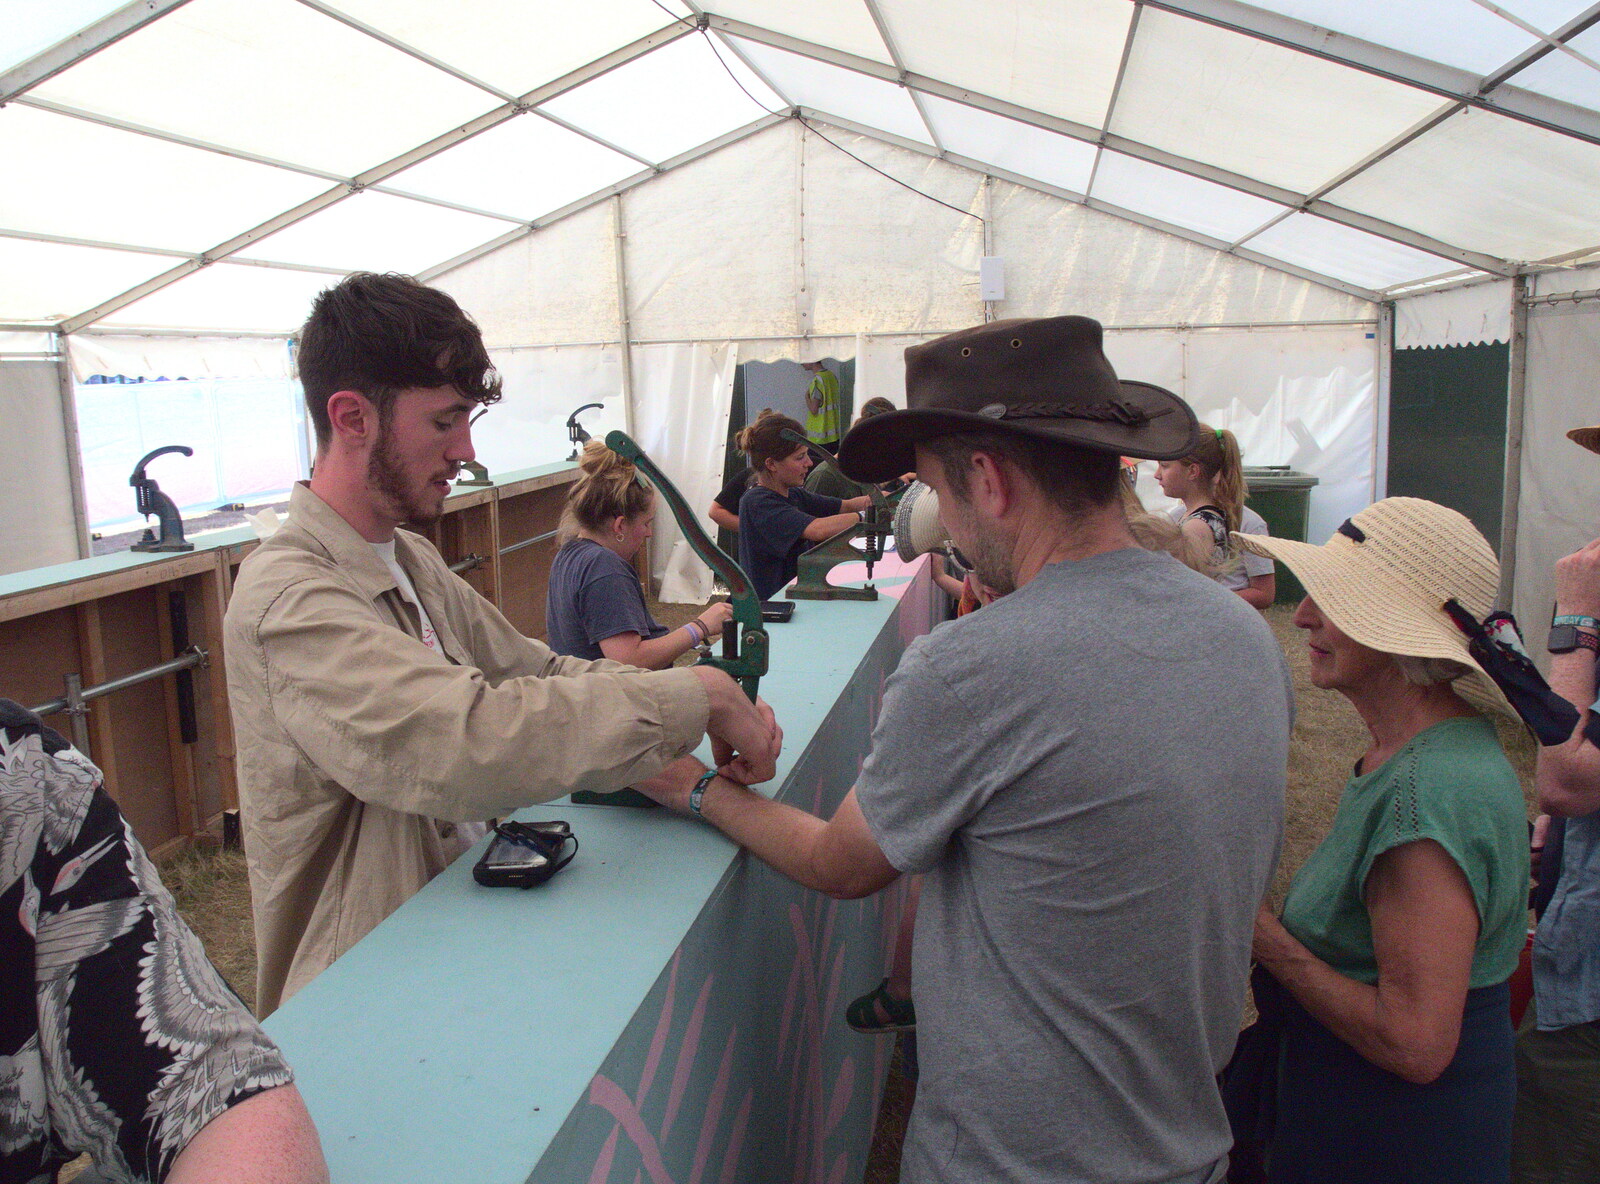 A Day at Latitude, Henham Park, Suffolk - 24th July 2022: Phil gets wristbanded